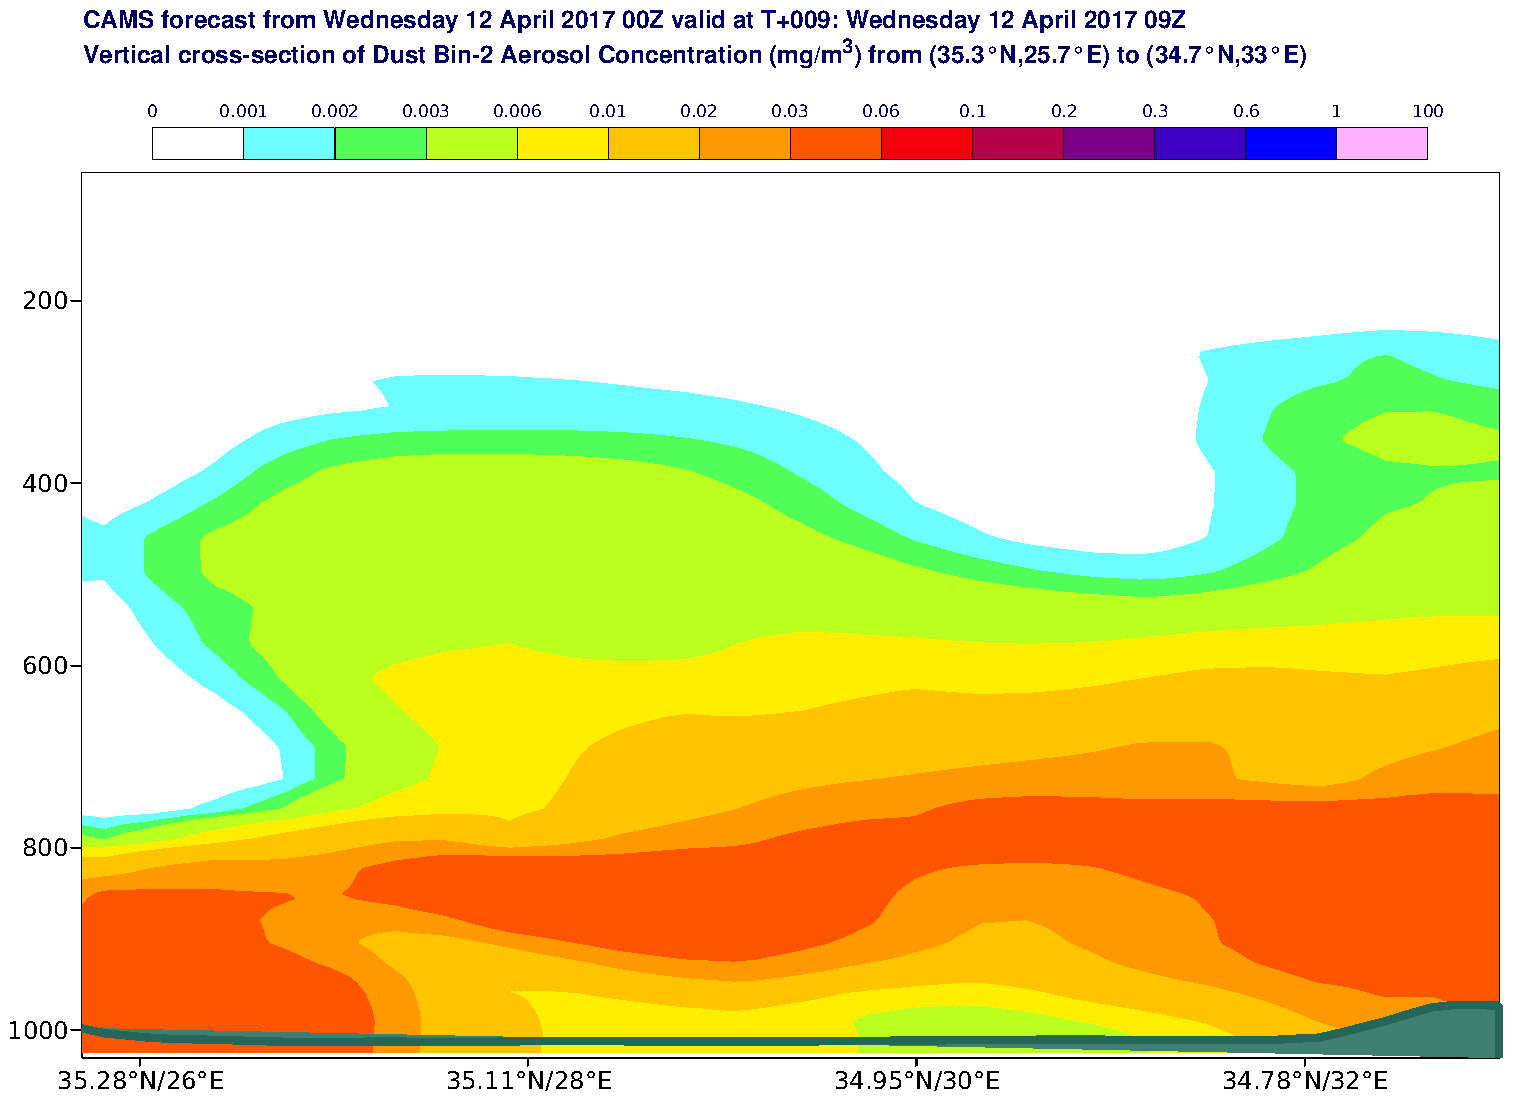 Vertical cross-section of Dust Bin-2 Aerosol Concentration (mg/m3) valid at T9 - 2017-04-12 09:00